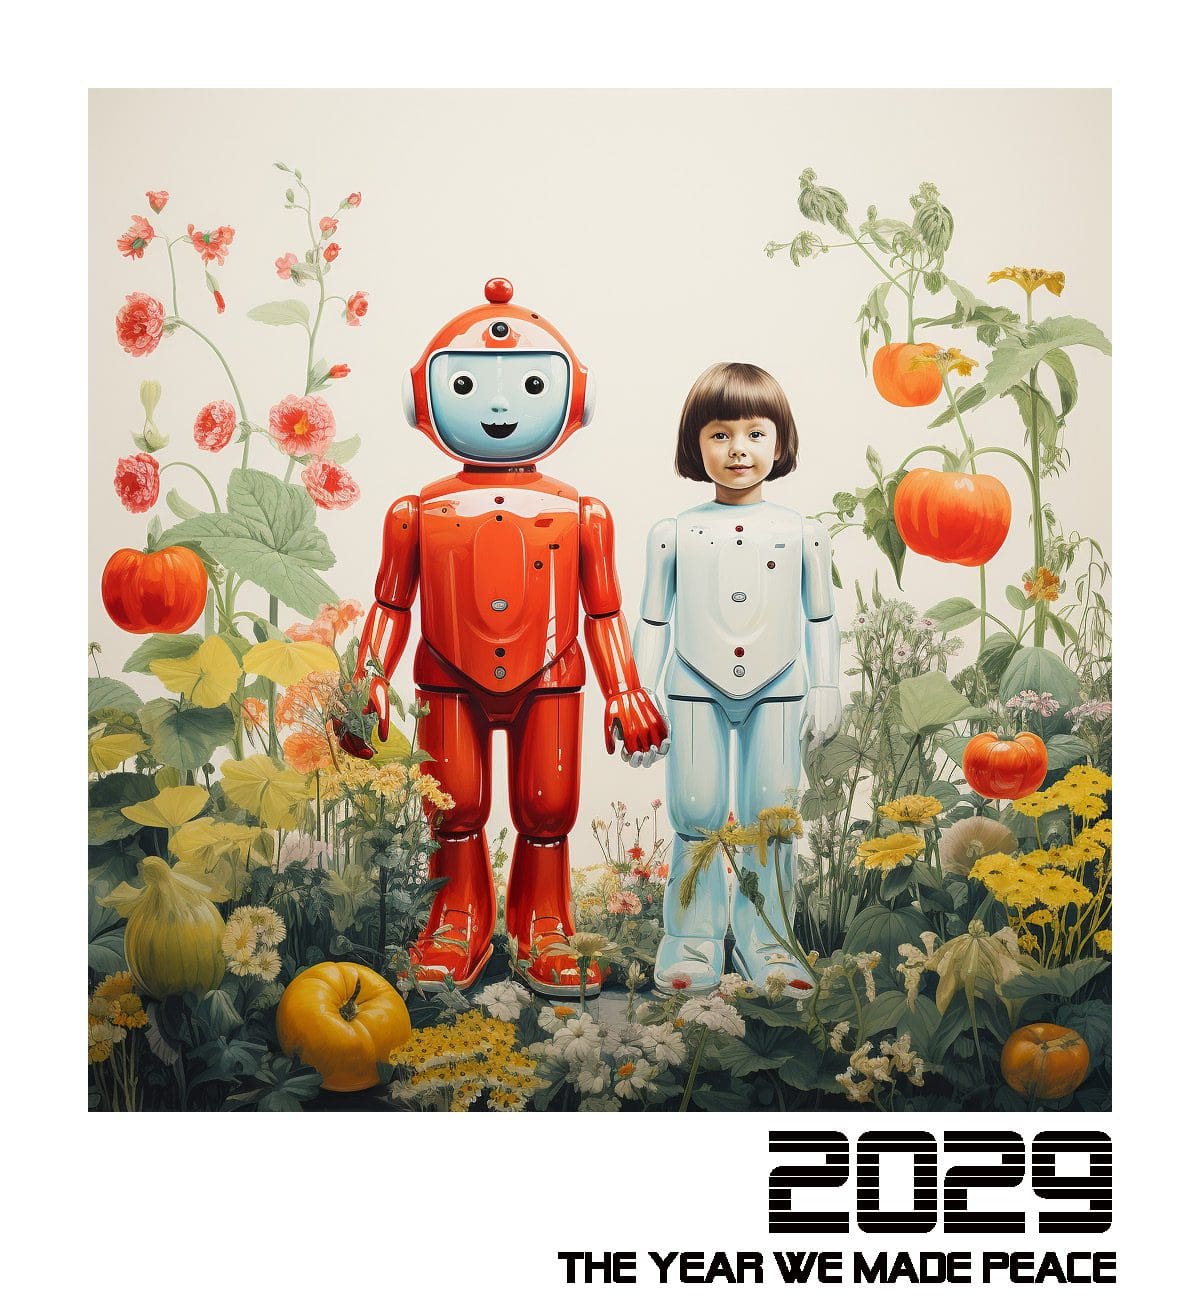 2029 The Year We Made Peace. A smiling red robot holds hands with a white robot with a human child's face. They stand happily in a colourful, flowering garden.